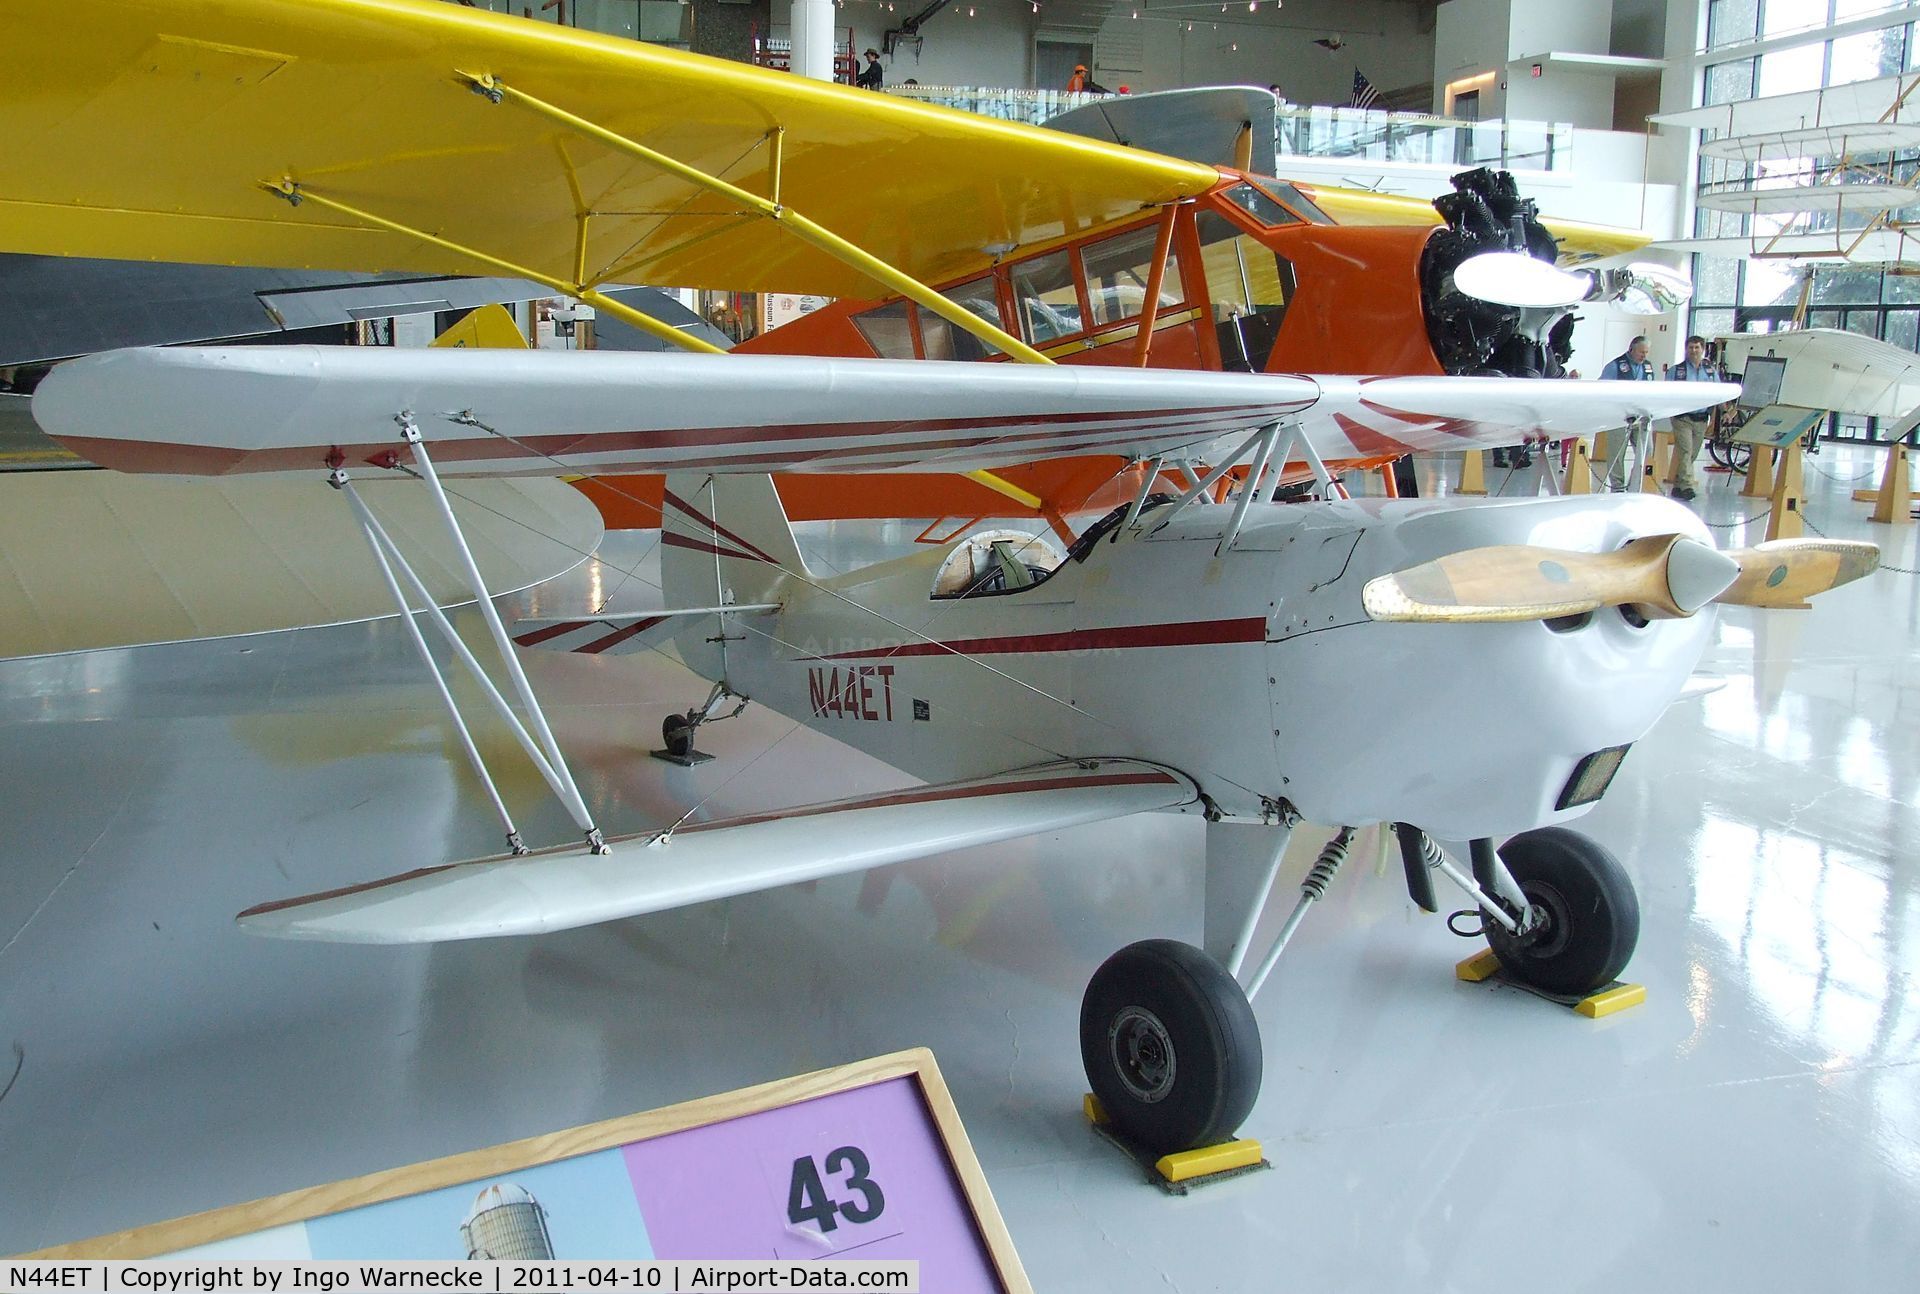 N44ET, 1993 Oldfield Baby Great Lakes BB LAK C/N 6907 M-187, Oldfield (W E Thorp) Baby Great Lakes at the Evergreen Aviation & Space Museum, McMinnville OR